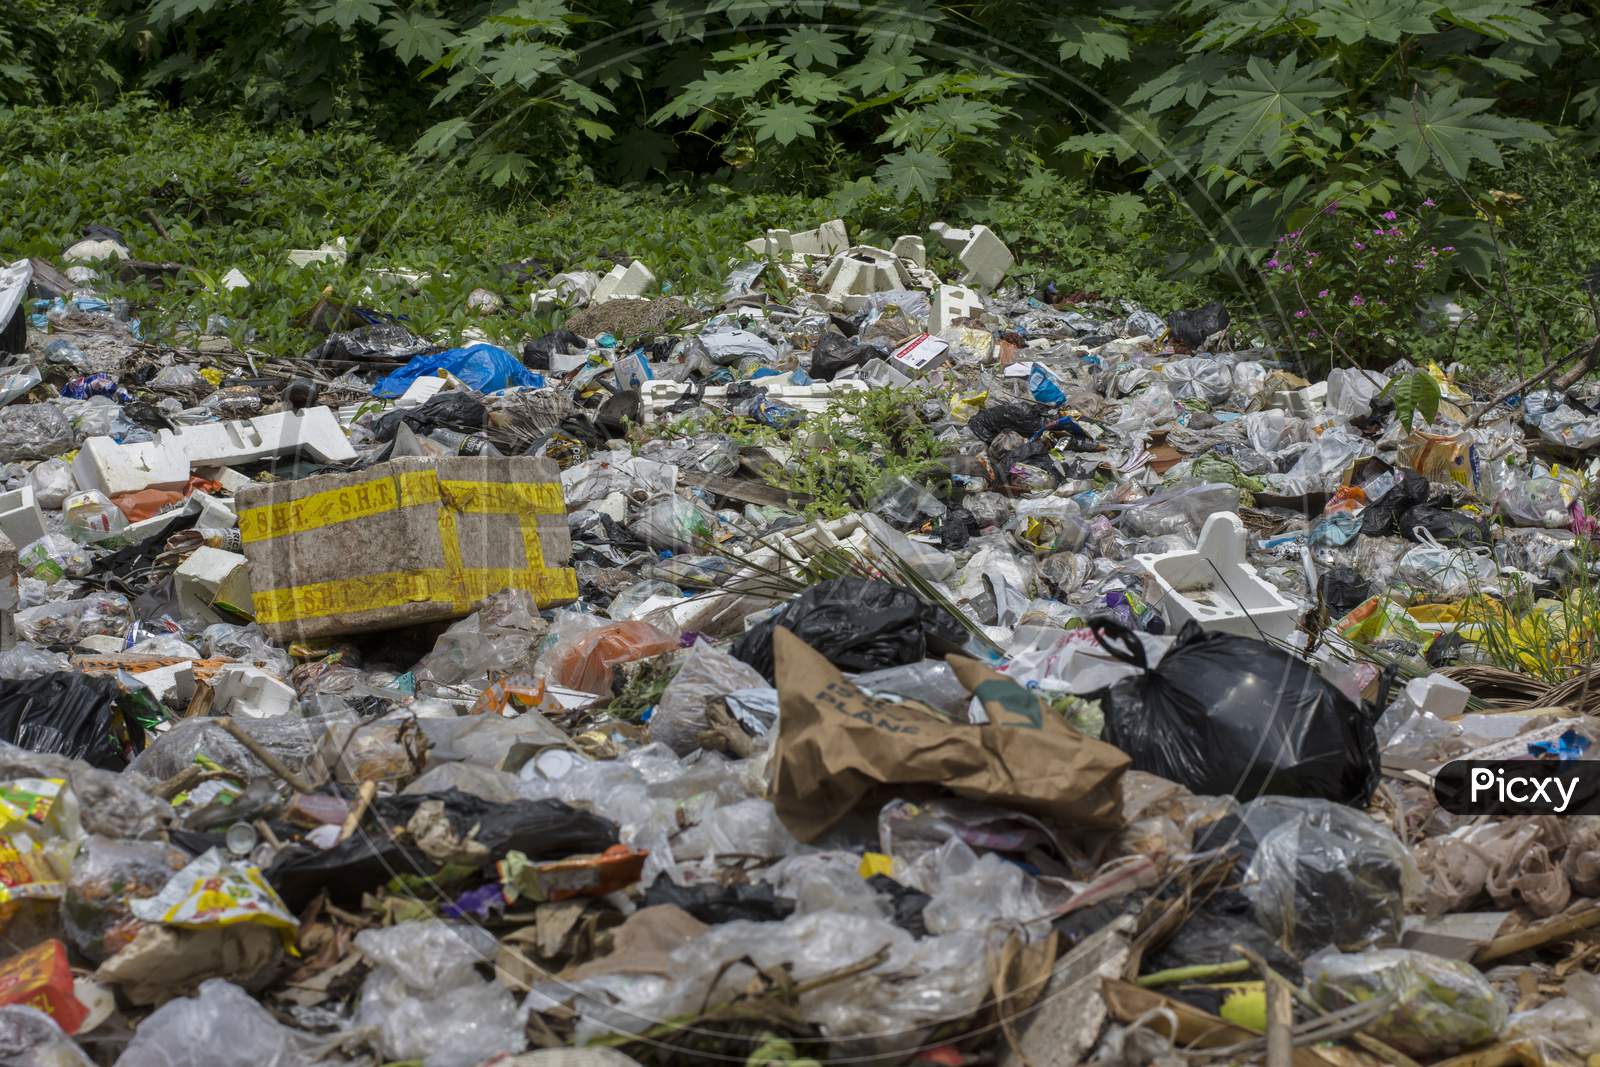 15Th August, 2021, Kolkata, West Bengal, India: Dump Of Garbage At Road Side Polluting Badly.